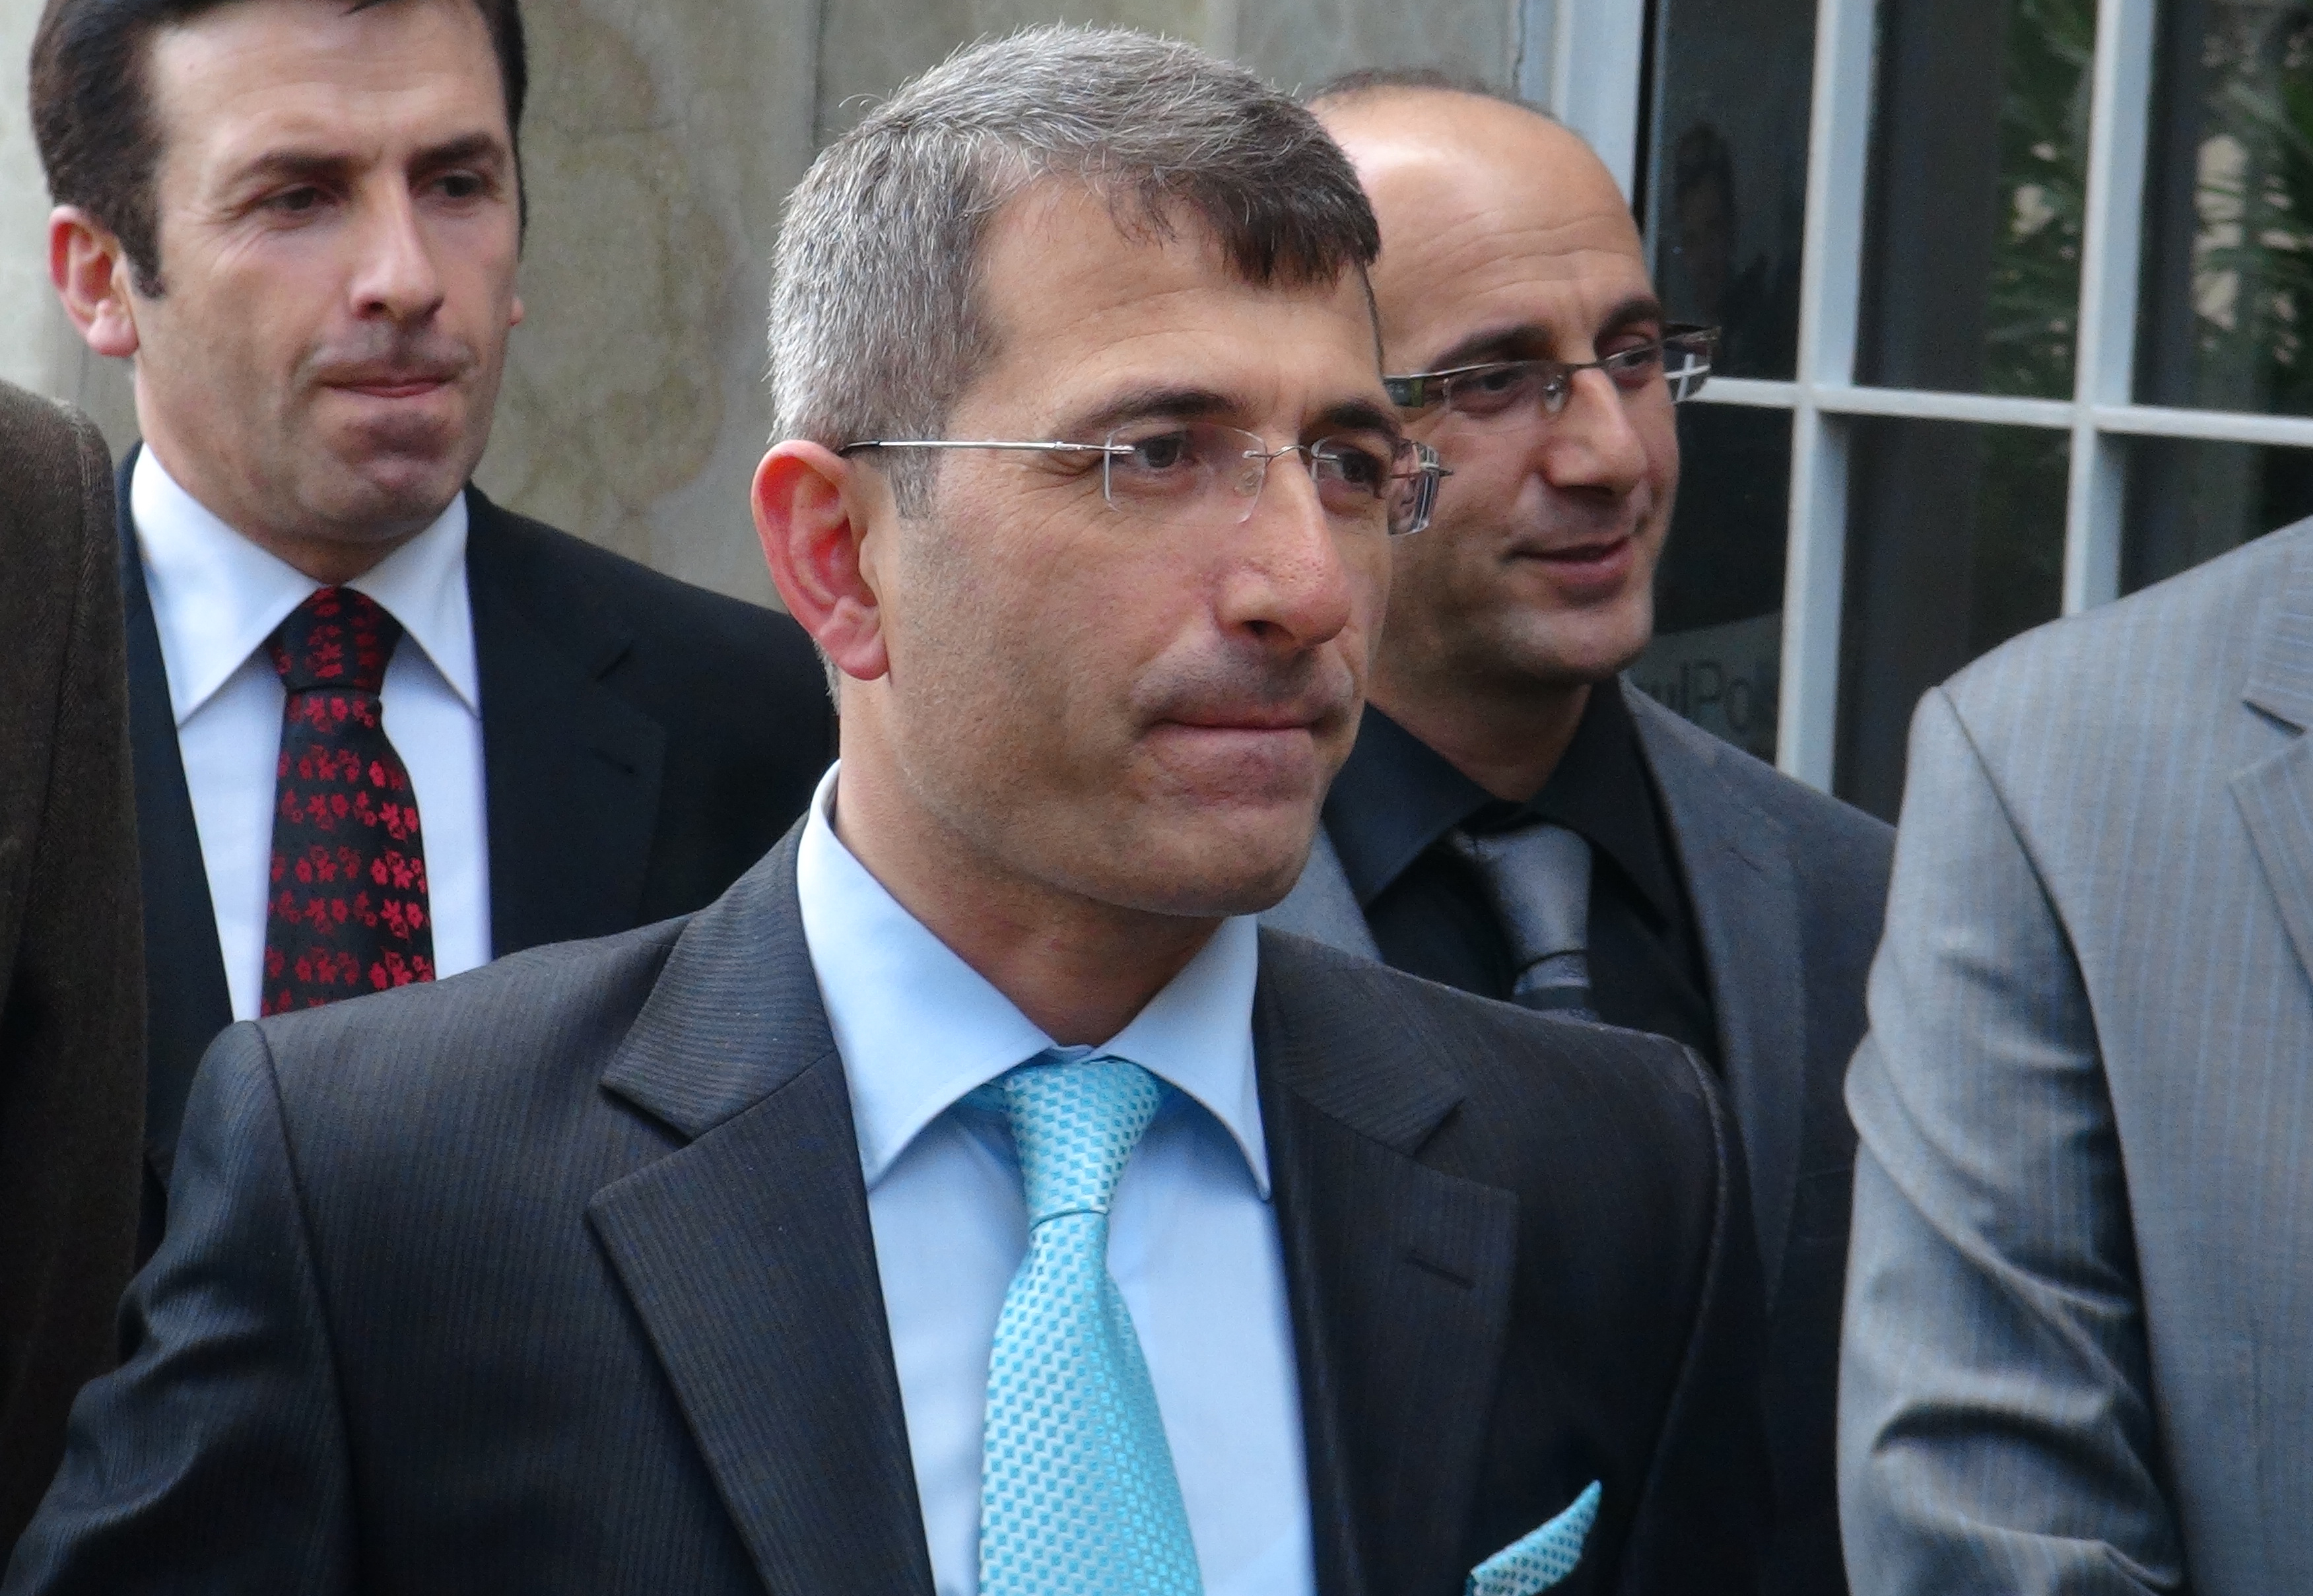 This photo taken on December 26, 2013, shows Turkish prosecutor Muammer Akkas as he walks out from a courthouse in Istanbul. The Turkish prosecutor said today he had been prevented from expanding a corruption investigation that has touched the heart of the government, alleging pressure on the judiciary. "All my colleagues and the public should be aware that I, as public prosecutor, have been prevented from launching an investigation," Muammer Akkas said in a statement. A high-level bribery and corruption investigation ensnaring former ministers and top businessmen has prompted a cabinet reshuffle by Prime Minister Recep Tayyip Erdogan, after three ministers stepped down in previous days. AFP PHOTO / CIHAN NEWS AGENCY / OSMAN ARSLAN ***TURKEY OUT*** (Photo credit should read Osman Arslan/AFP/Getty Images)